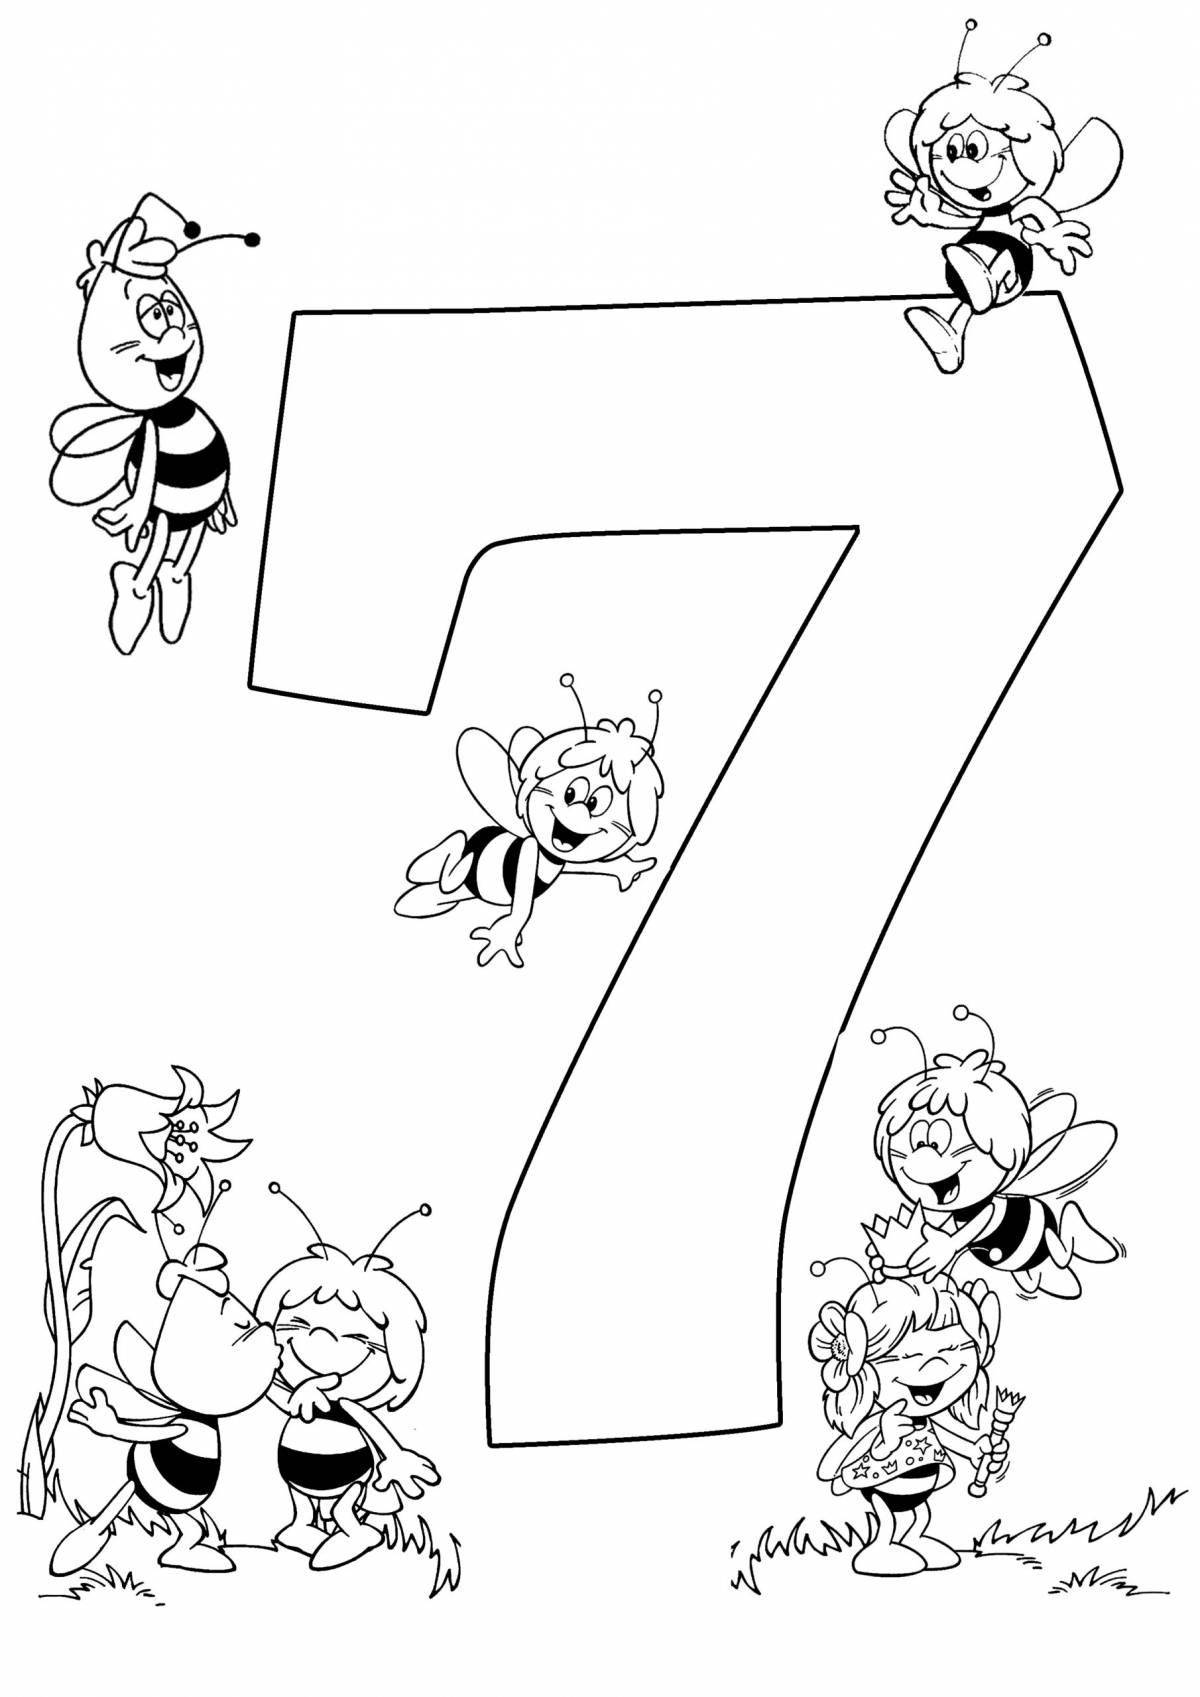 Coloring Book No. 7 for Children